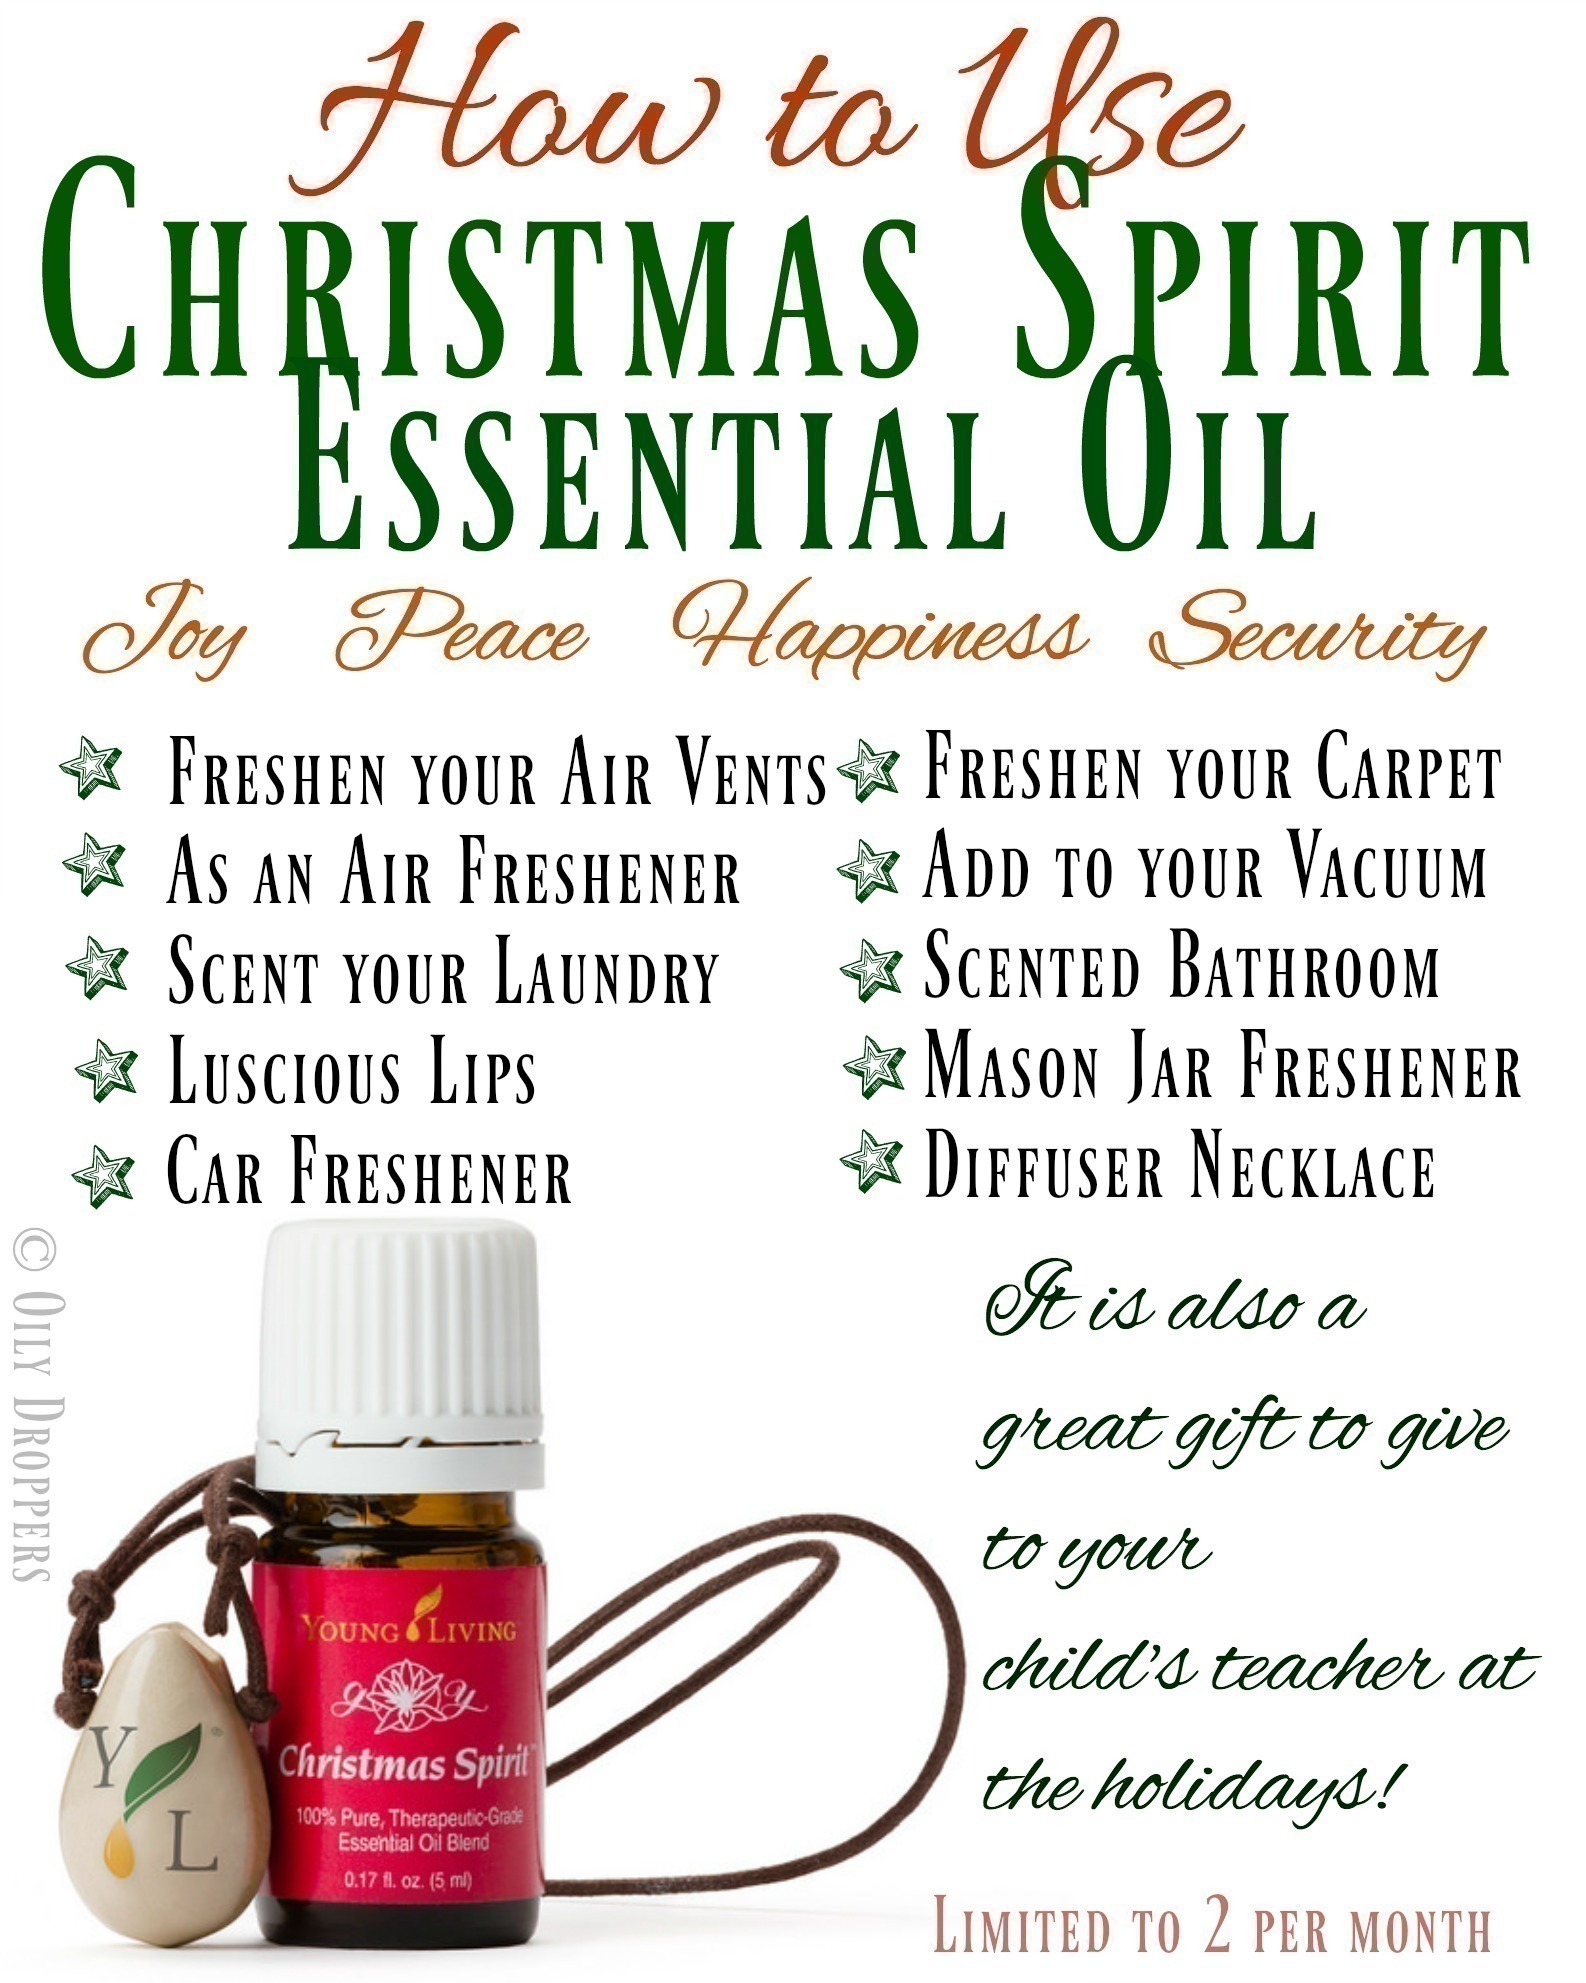 How to Use Christmas Spirit Essential Oil